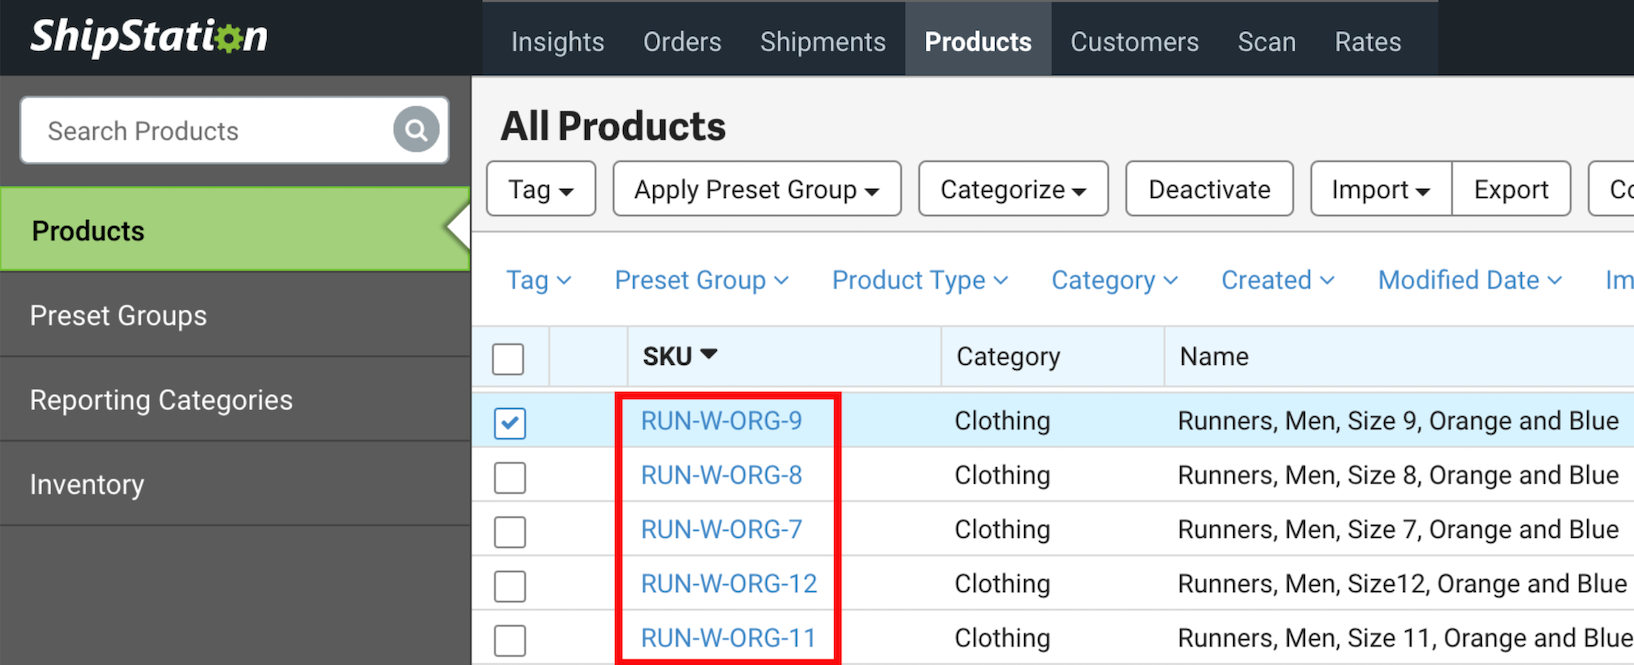 Products grid. Red box around SKUs in SKU column to show hyperlinks to Product Details